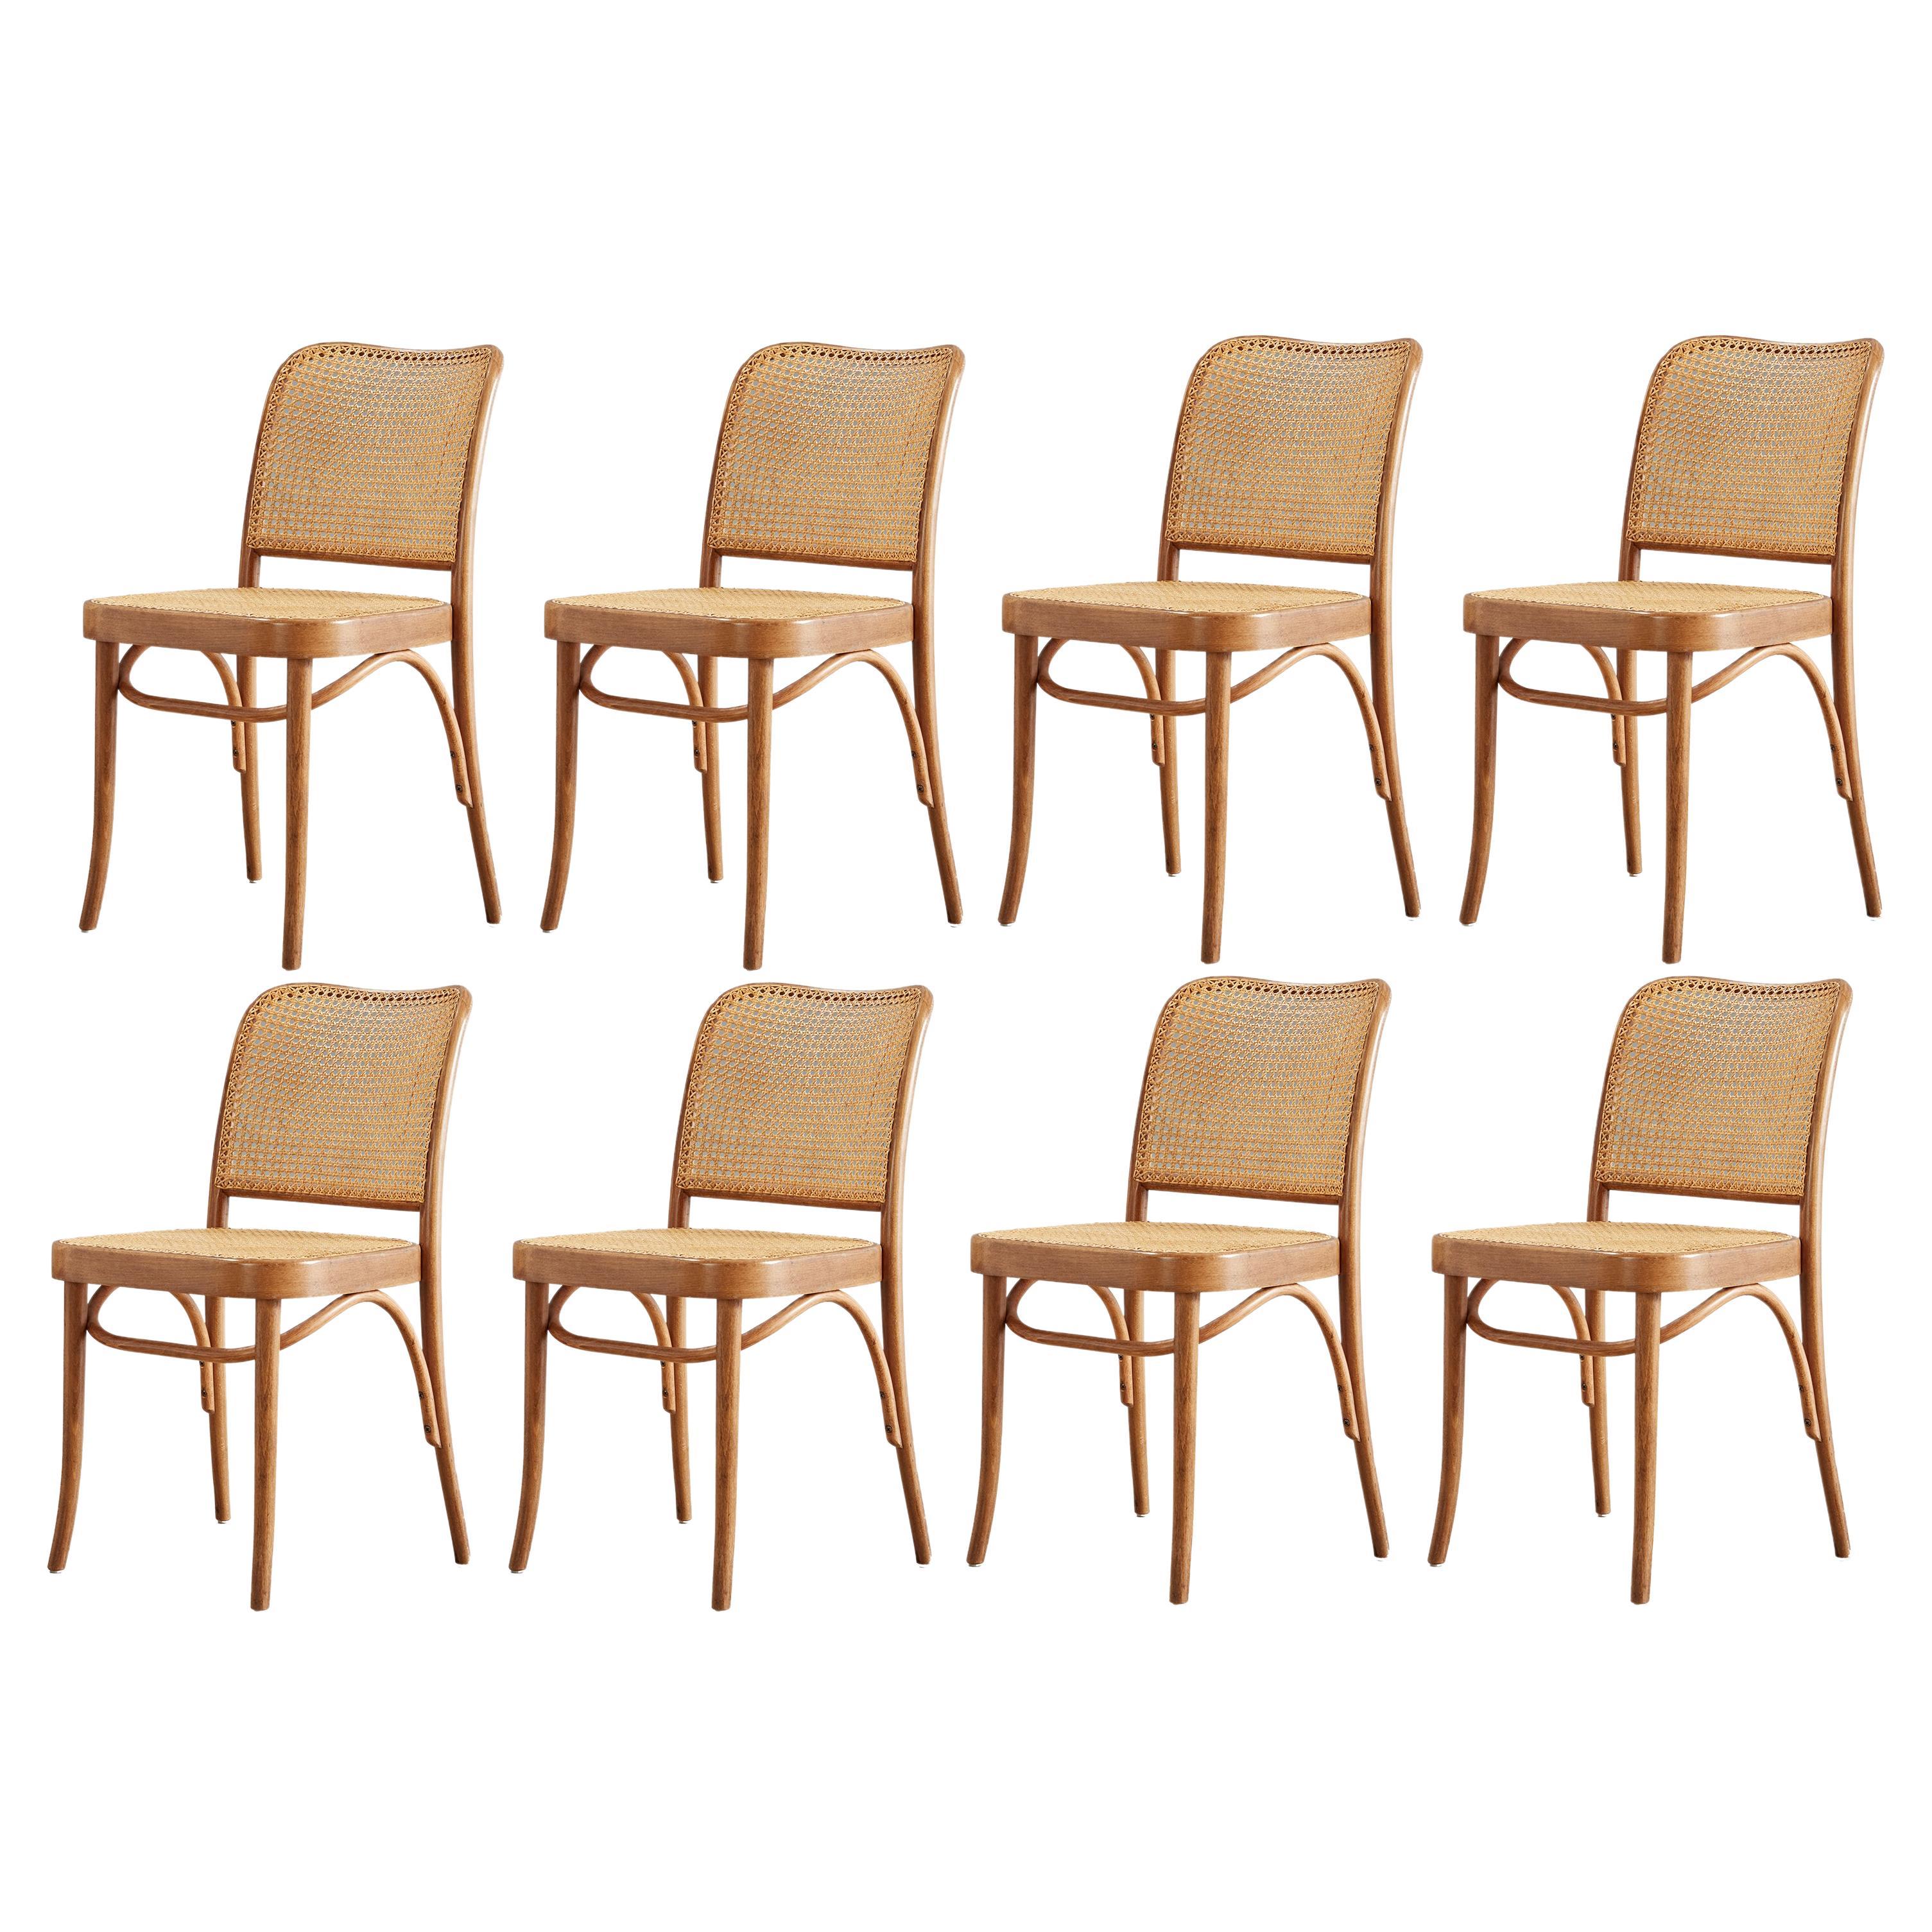 Josef Hoffman Bentwood and Cane Prague Chair for Thonet, 8 available 